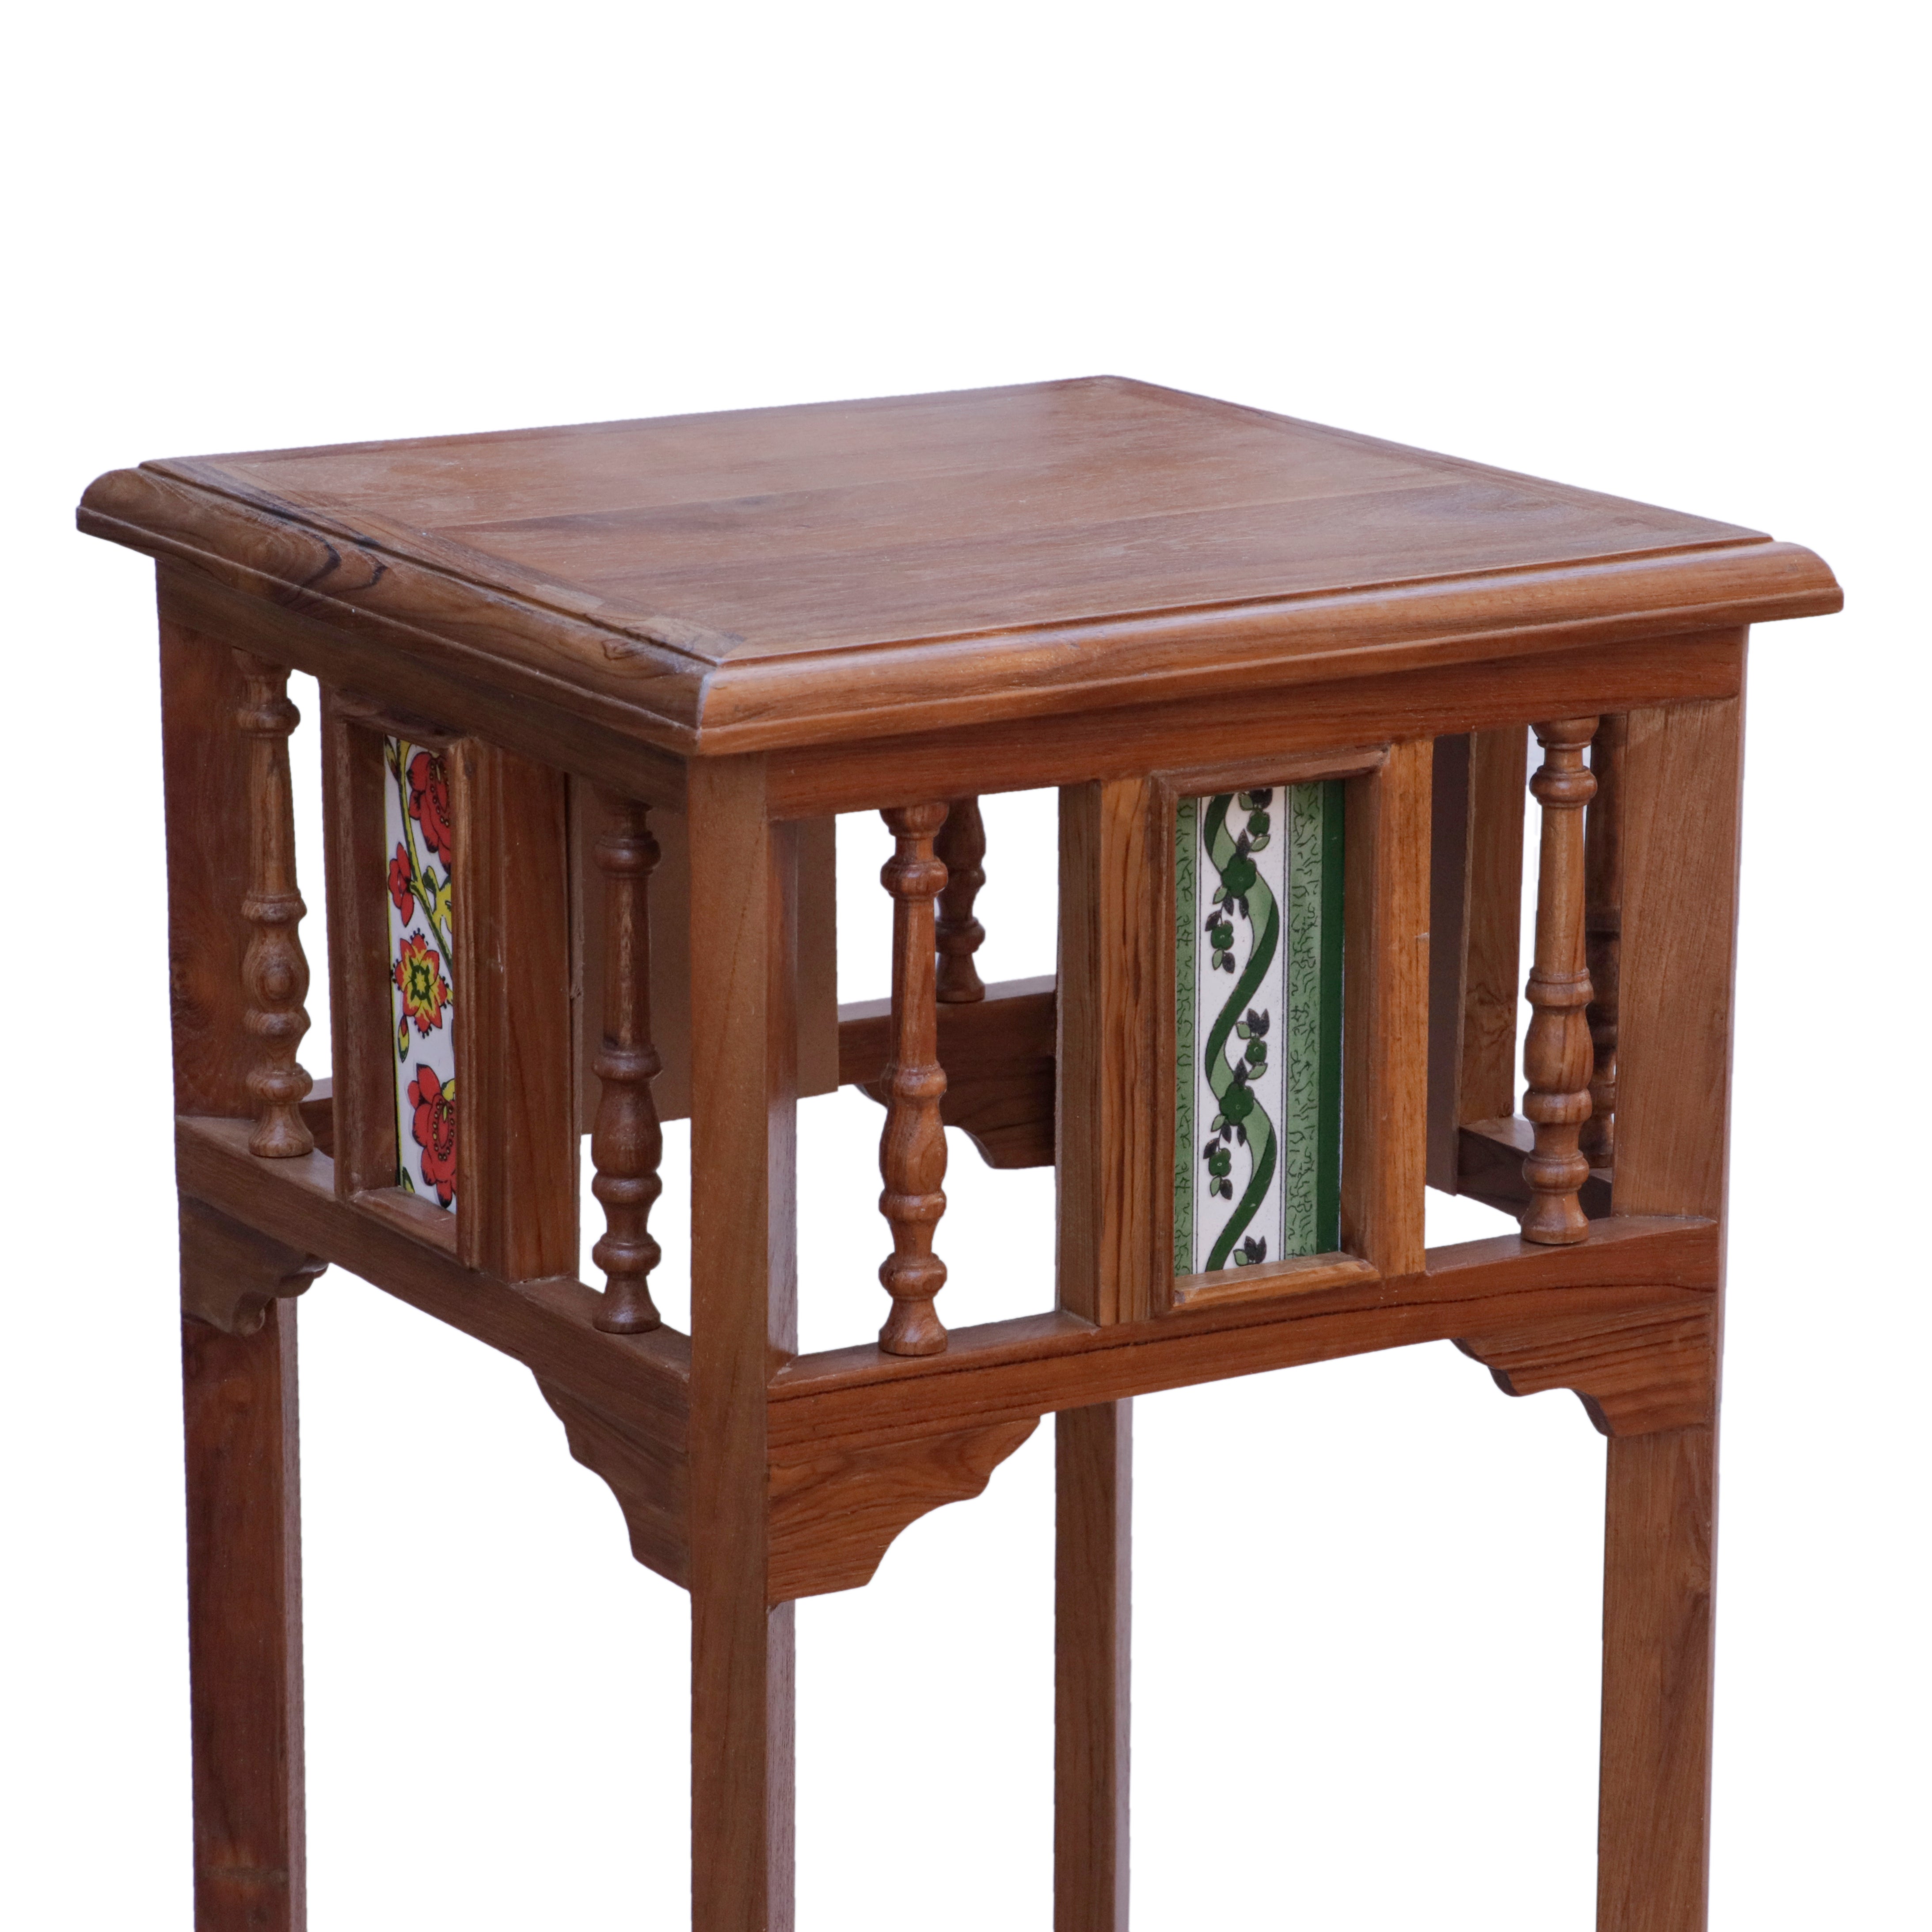 Wide-end Tiled Table End Table